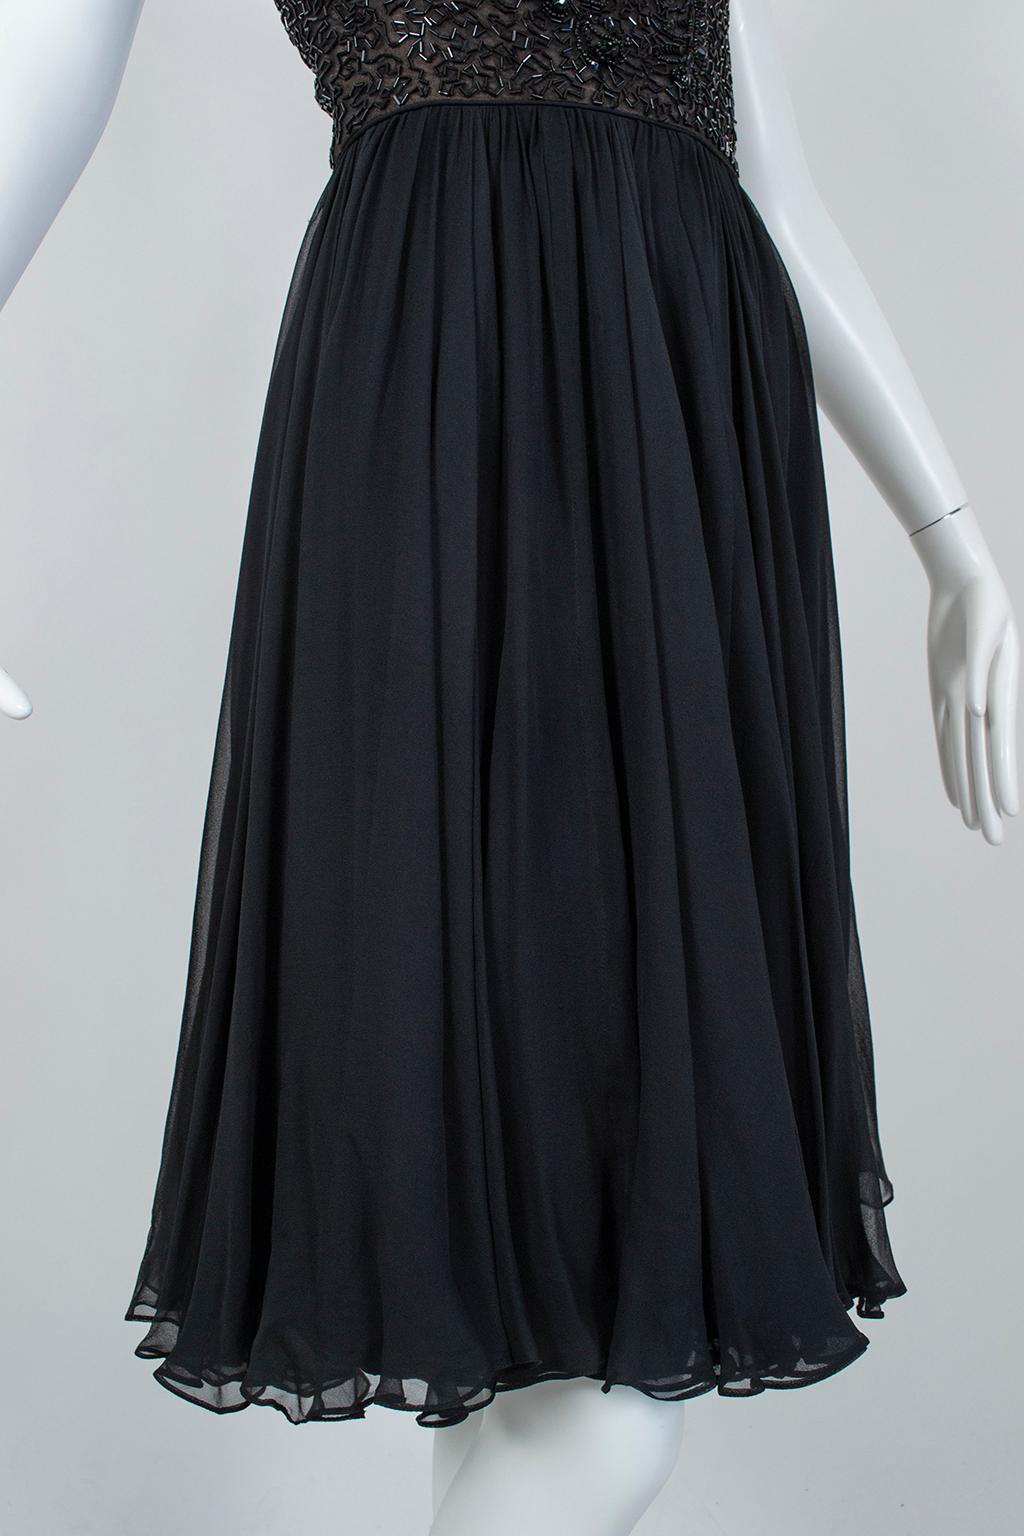 Black Chandelier Bead Illusion Party Dress with Swirling Trumpet Skirt– M, 1950s For Sale 5